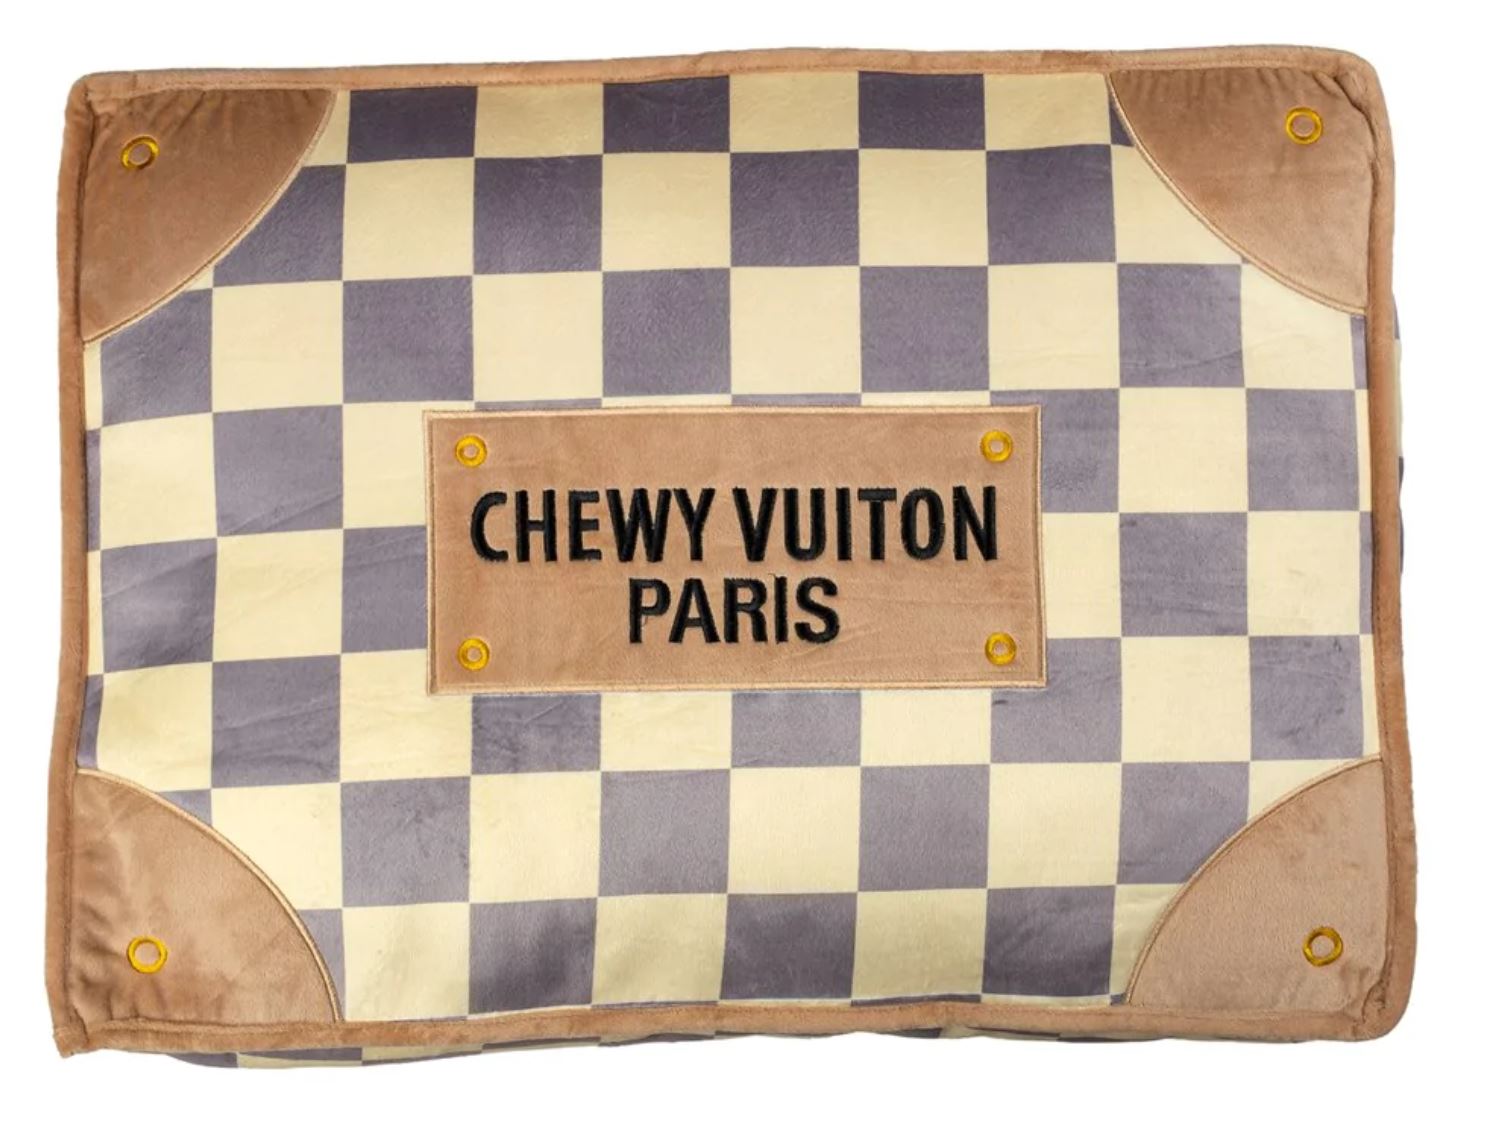 Chewy Vuiton Small Dog Bed